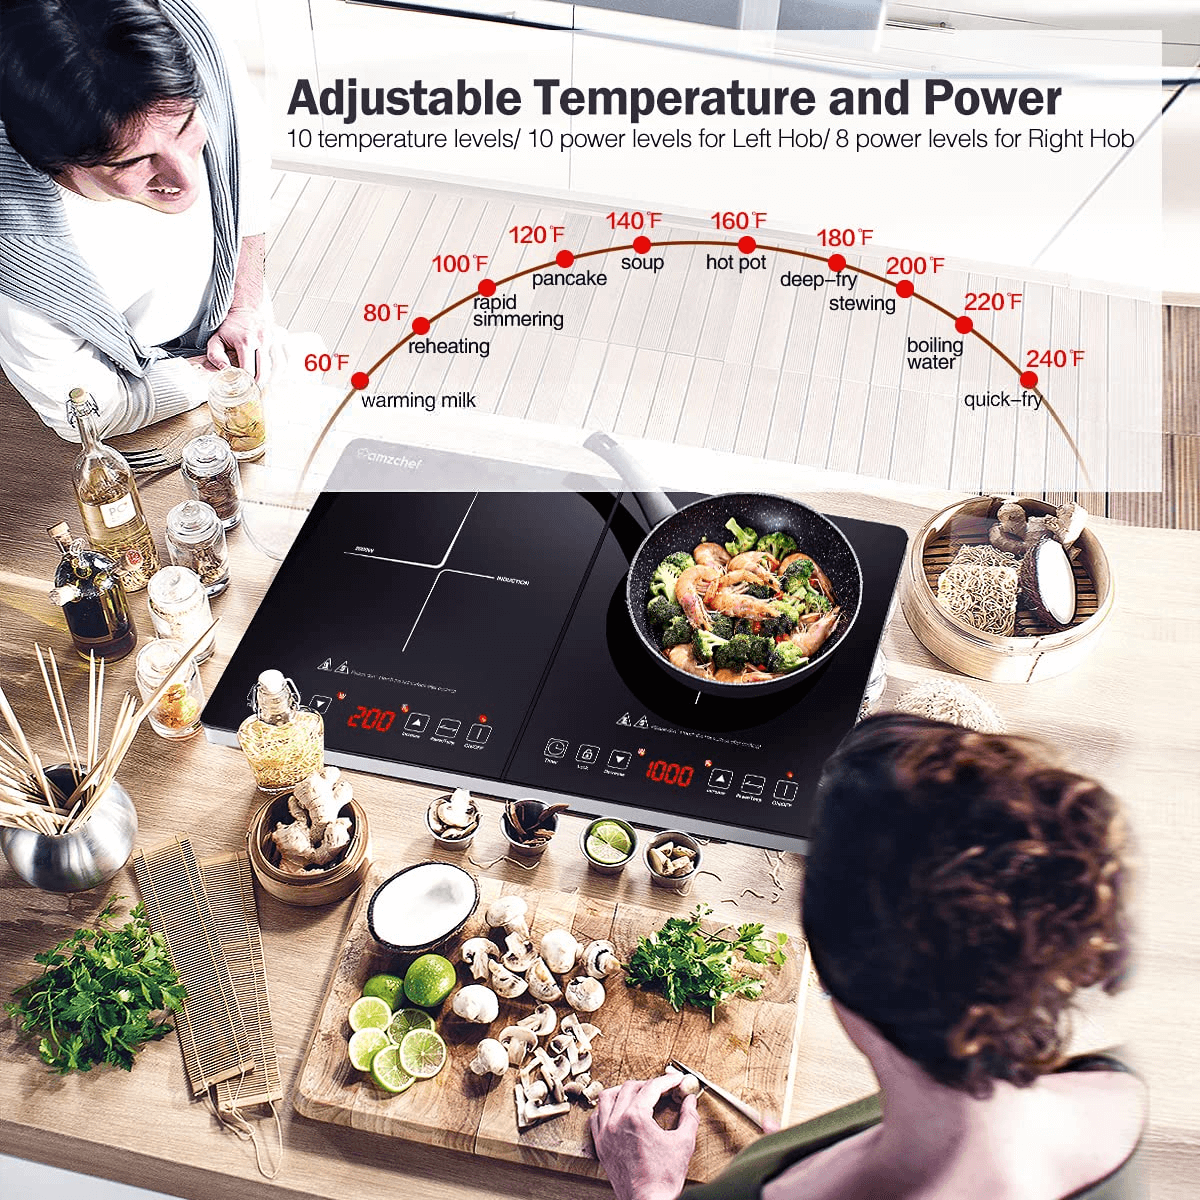 AMZCHEF Portable Double Induction Cooktop with 2 Burners YL18-DC08